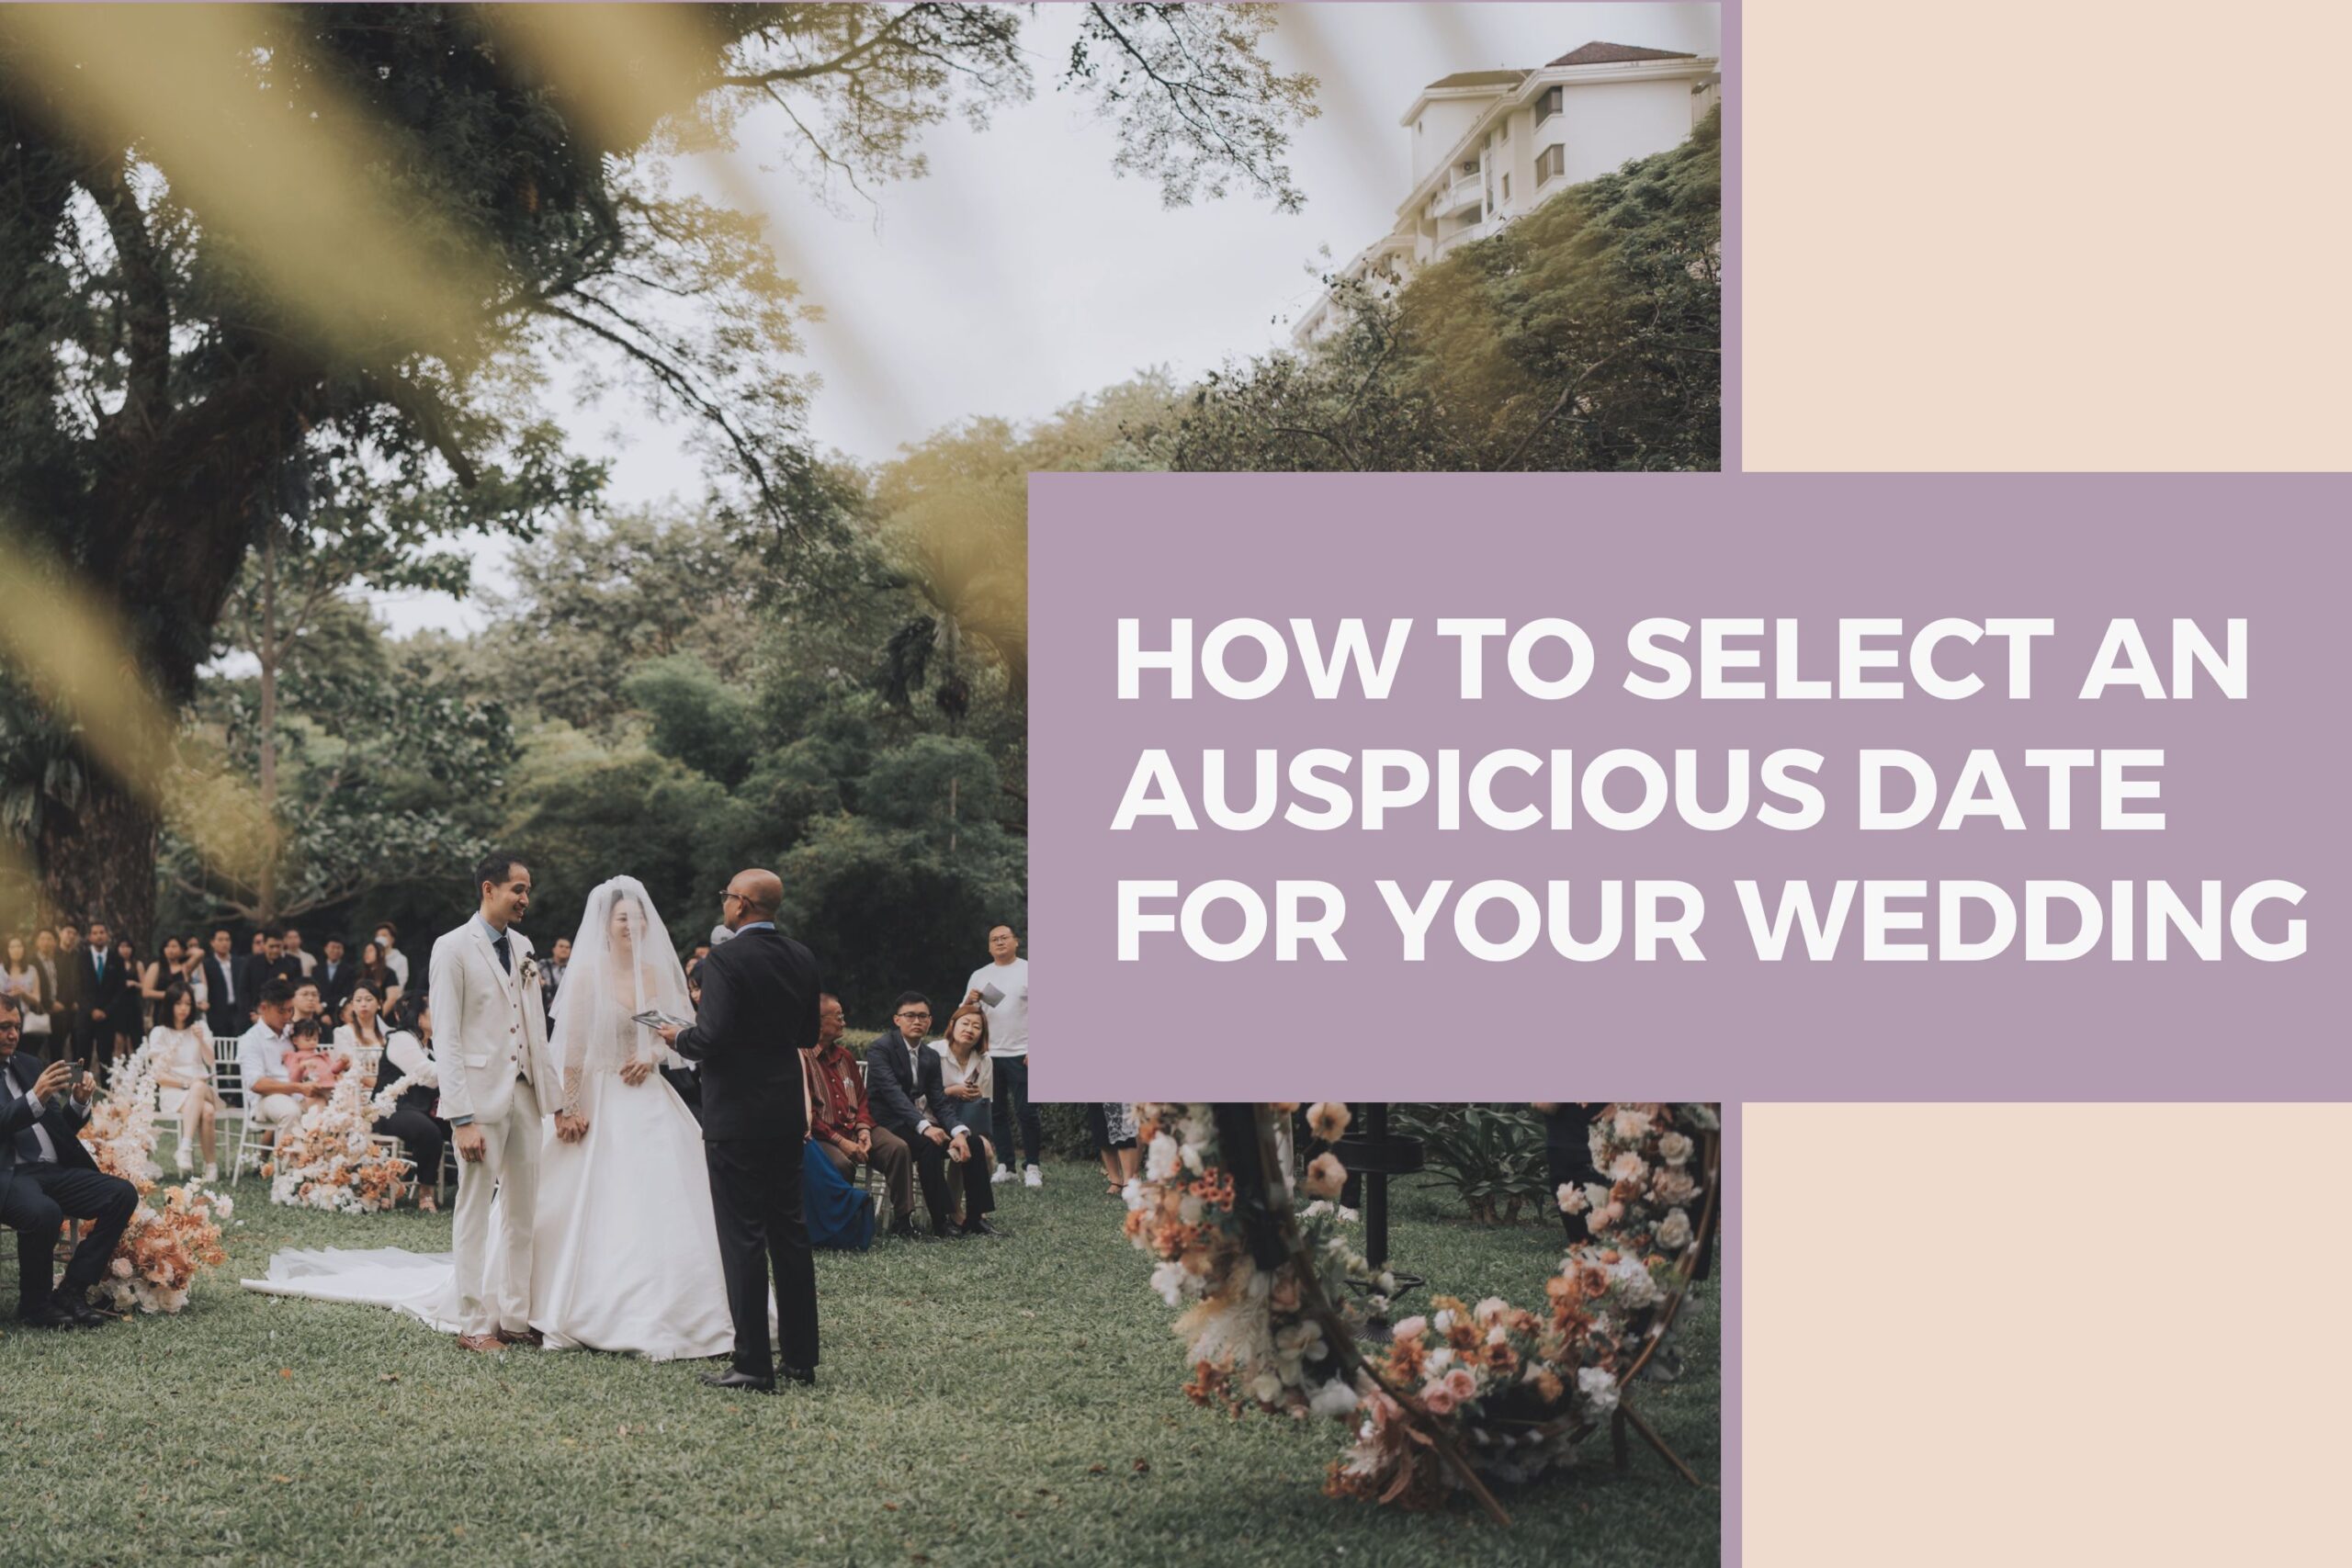 How to Select an Auspicious Date for Your Wedding